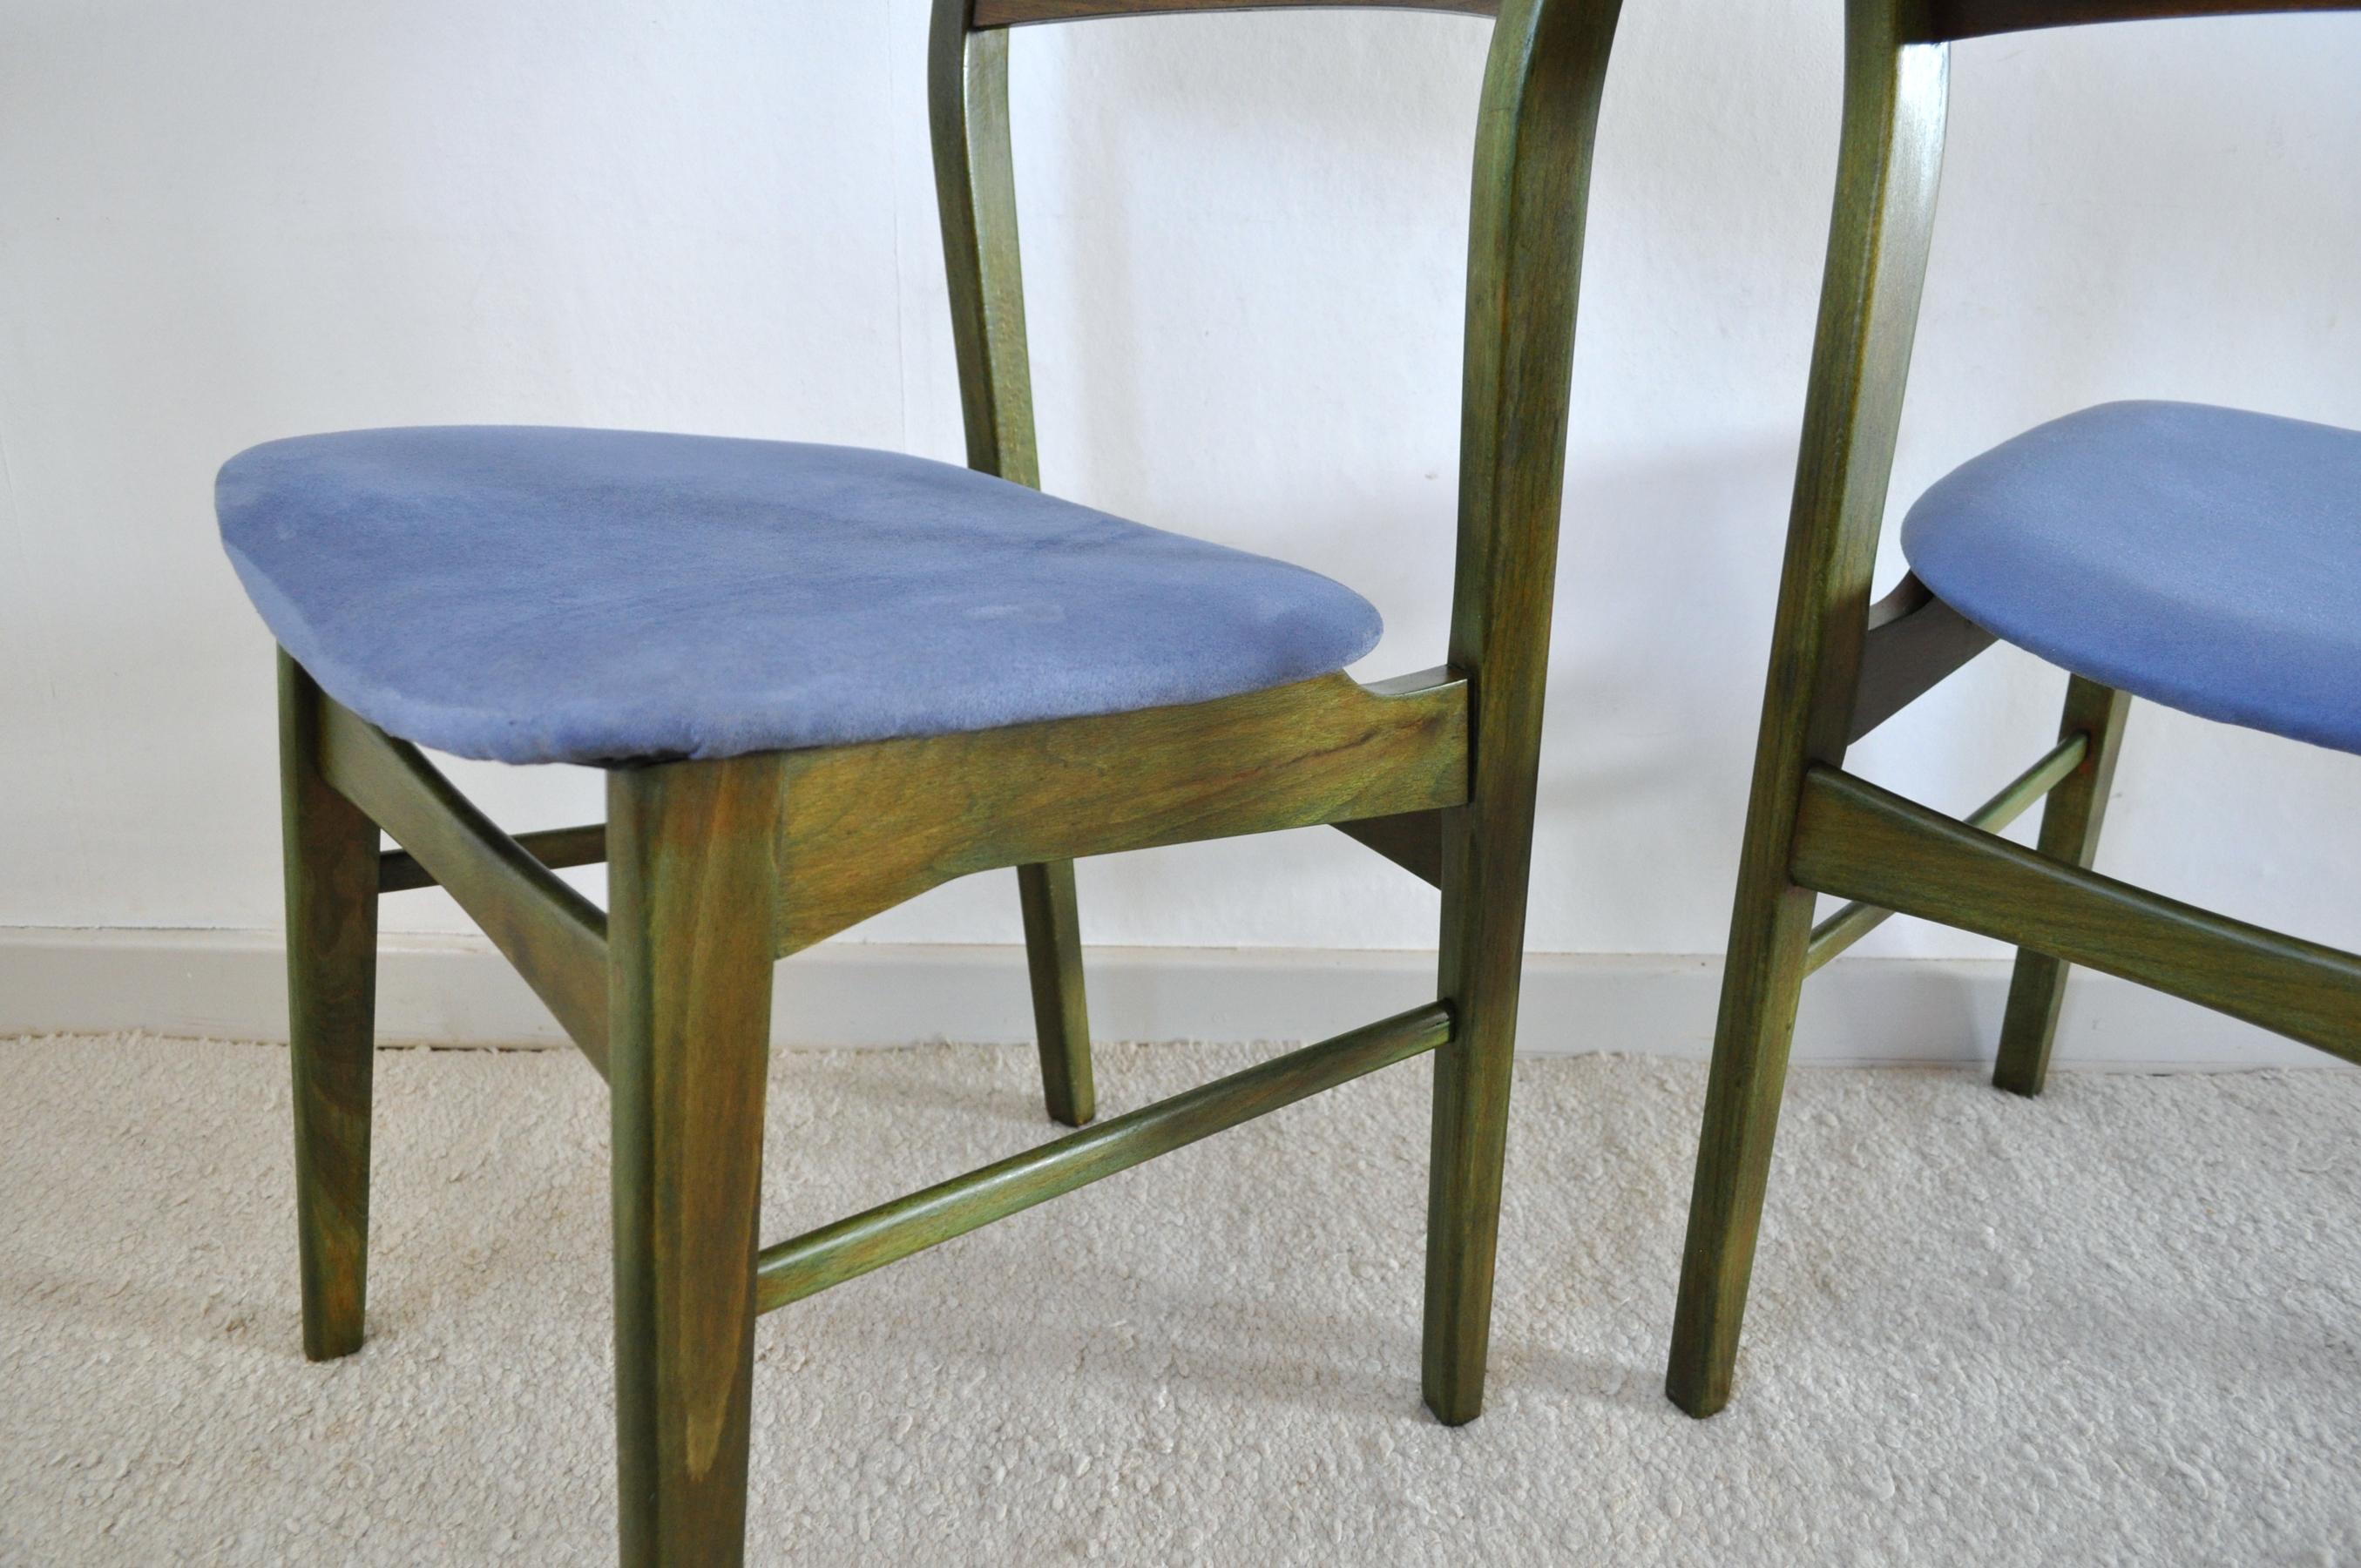 Danish Modern Dining Chair Stained in an Emerald Color, 1960s For Sale 1